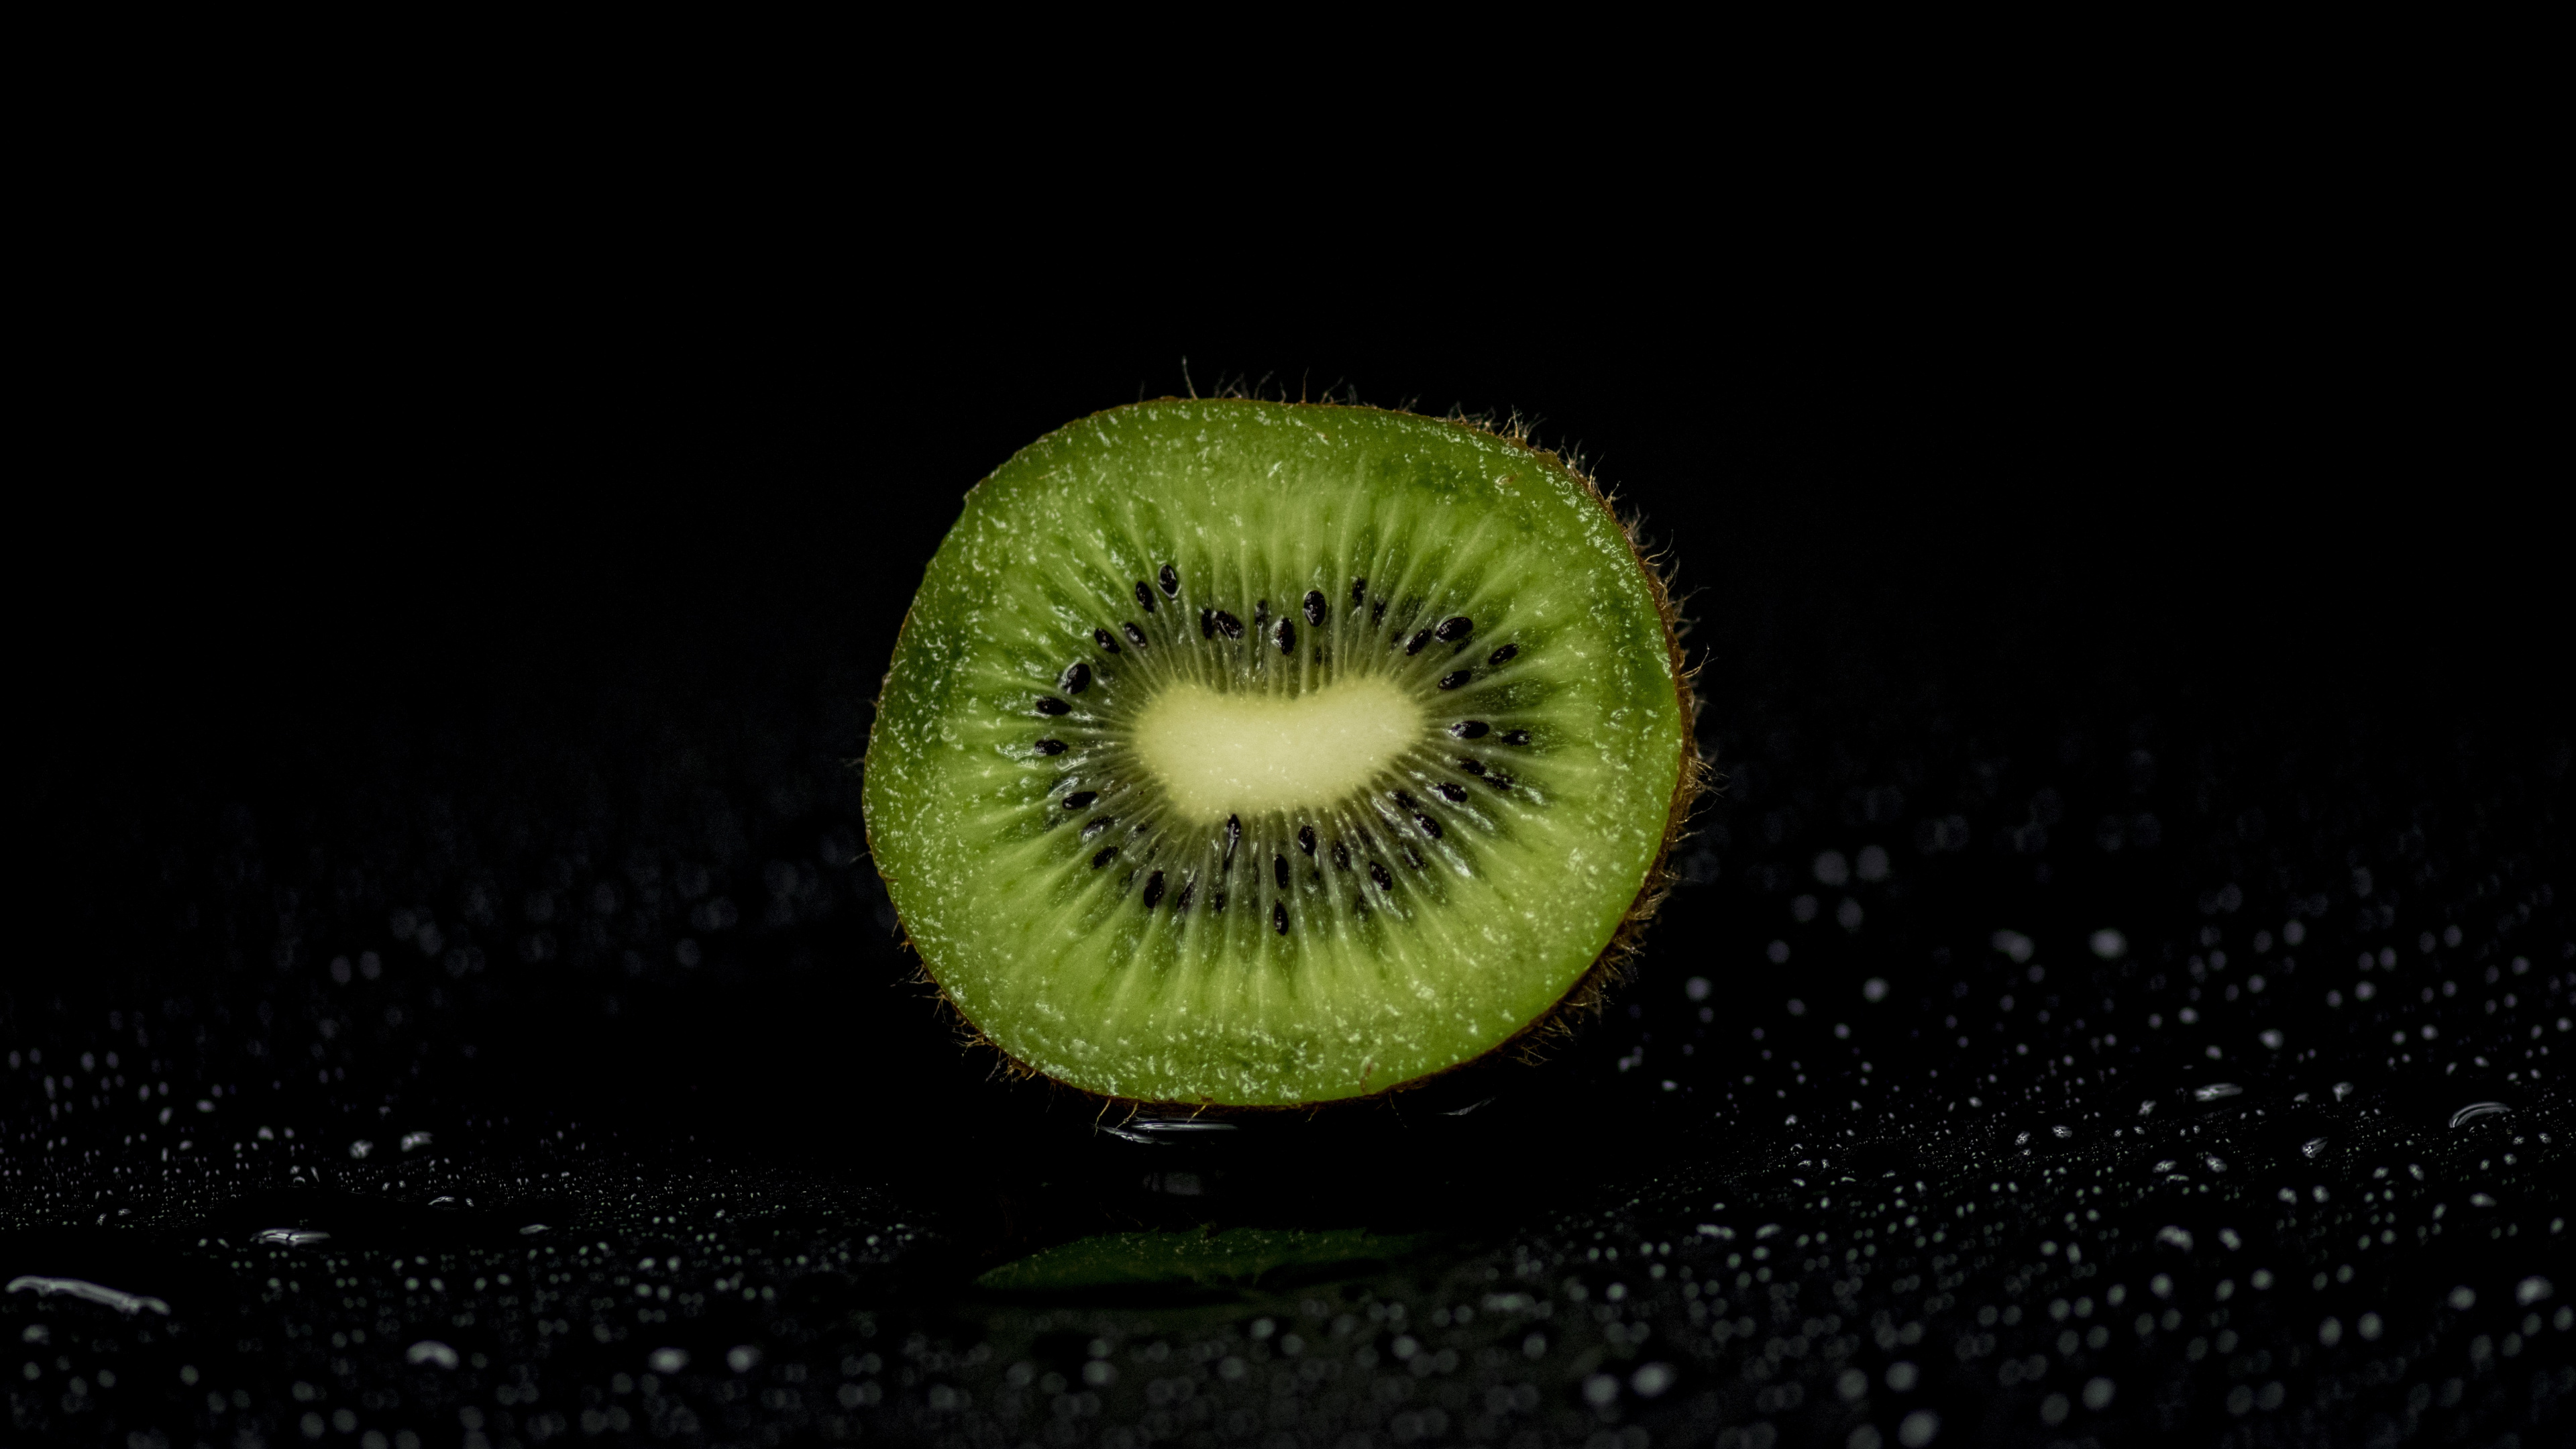 Green Round Fruit on Black Surface. Wallpaper in 3840x2160 Resolution